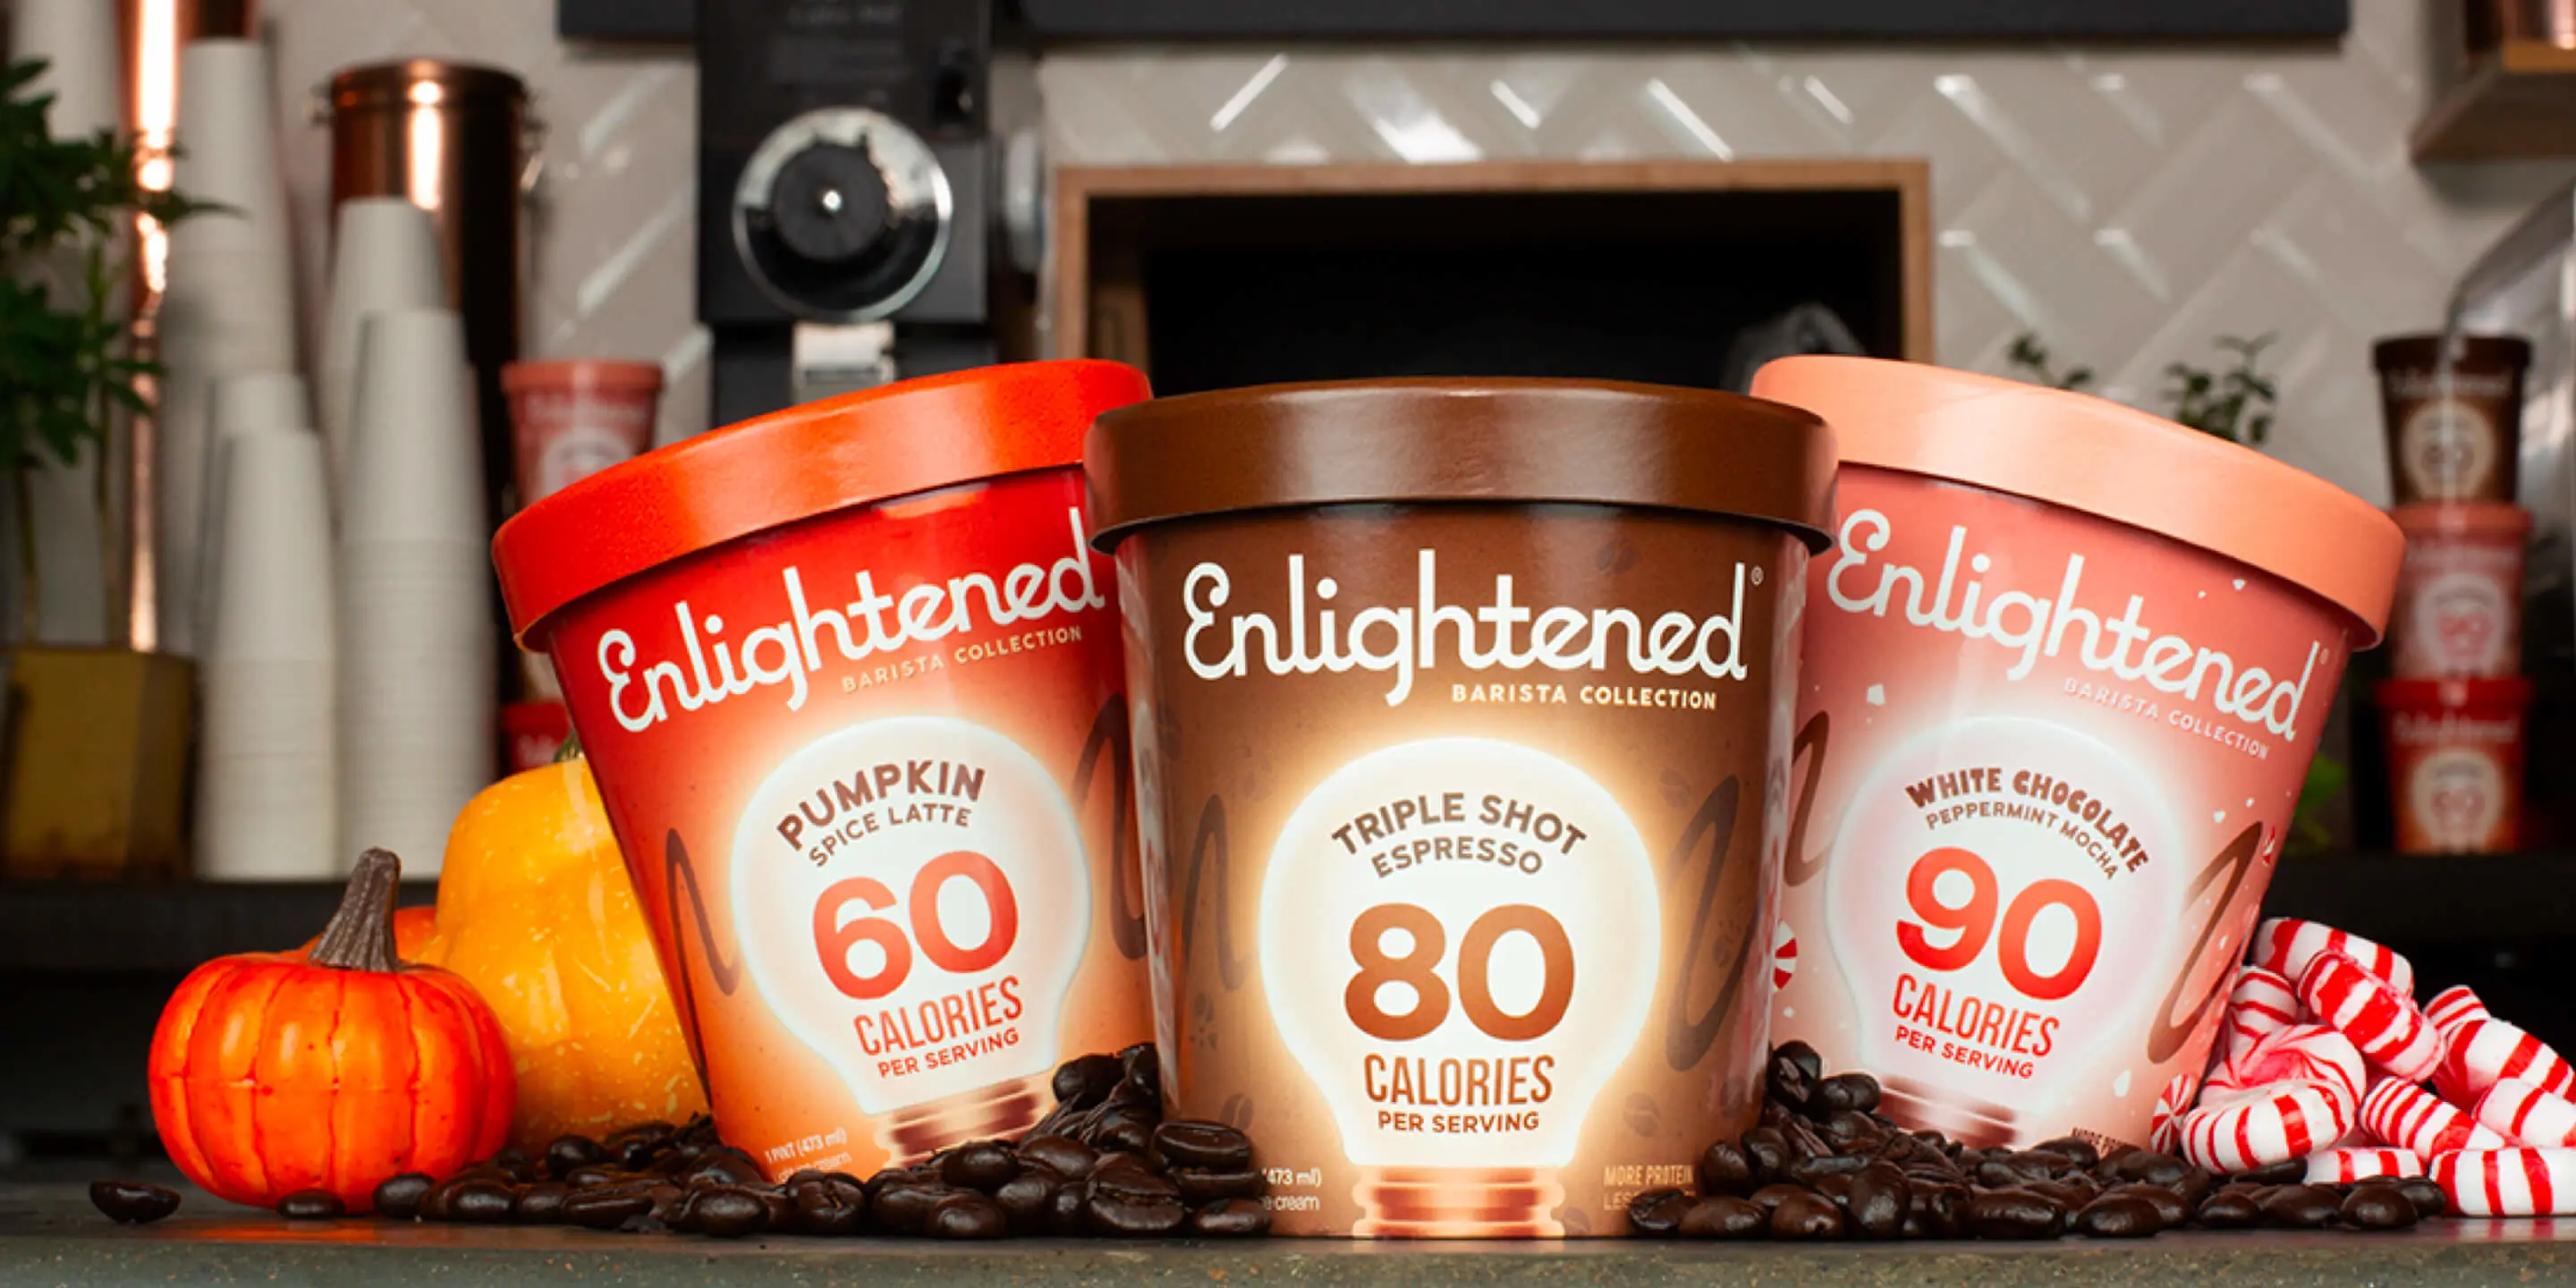 enlightened ice cream pints in coffee shop background